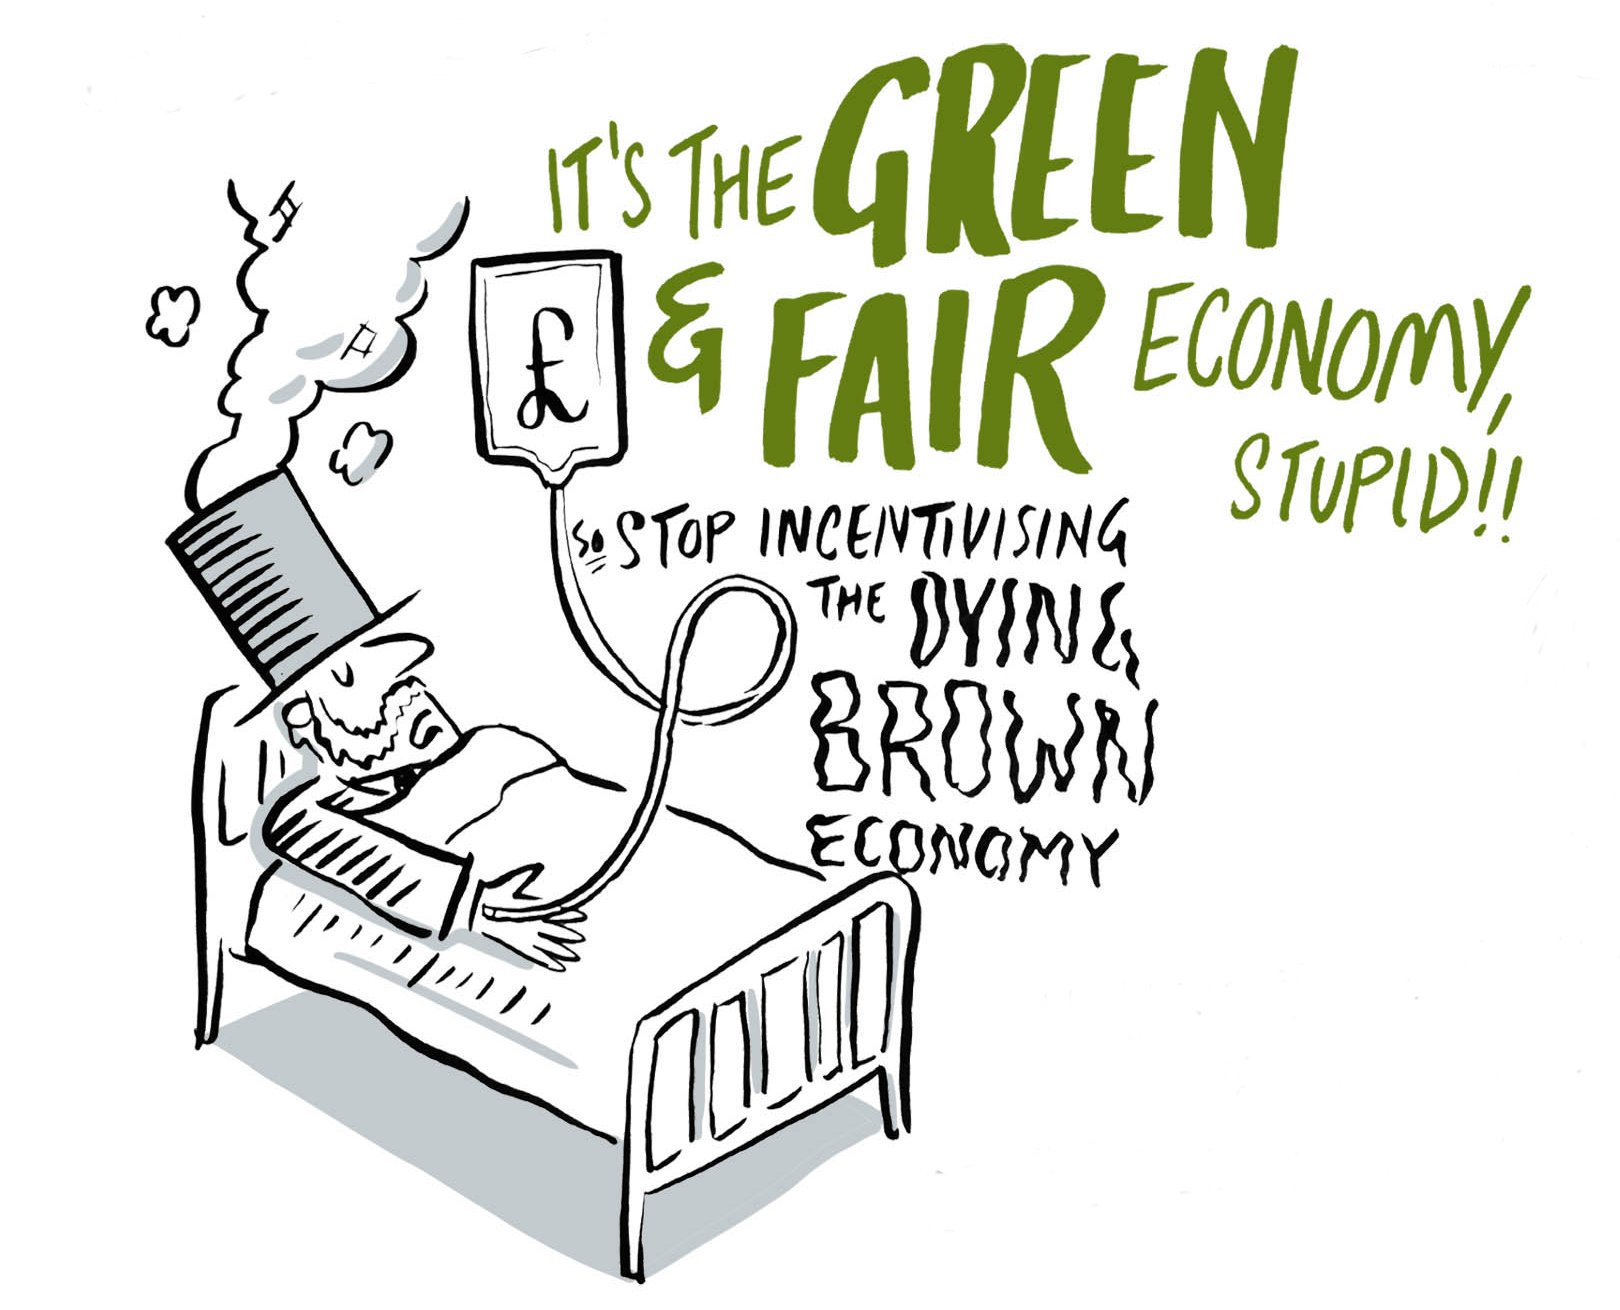 Let’s get started. We know economies need to be both inclusive & sustainable, but we want your views on 6 key questions... #GreenmustbeFair https://t.co/1pALxkm50D